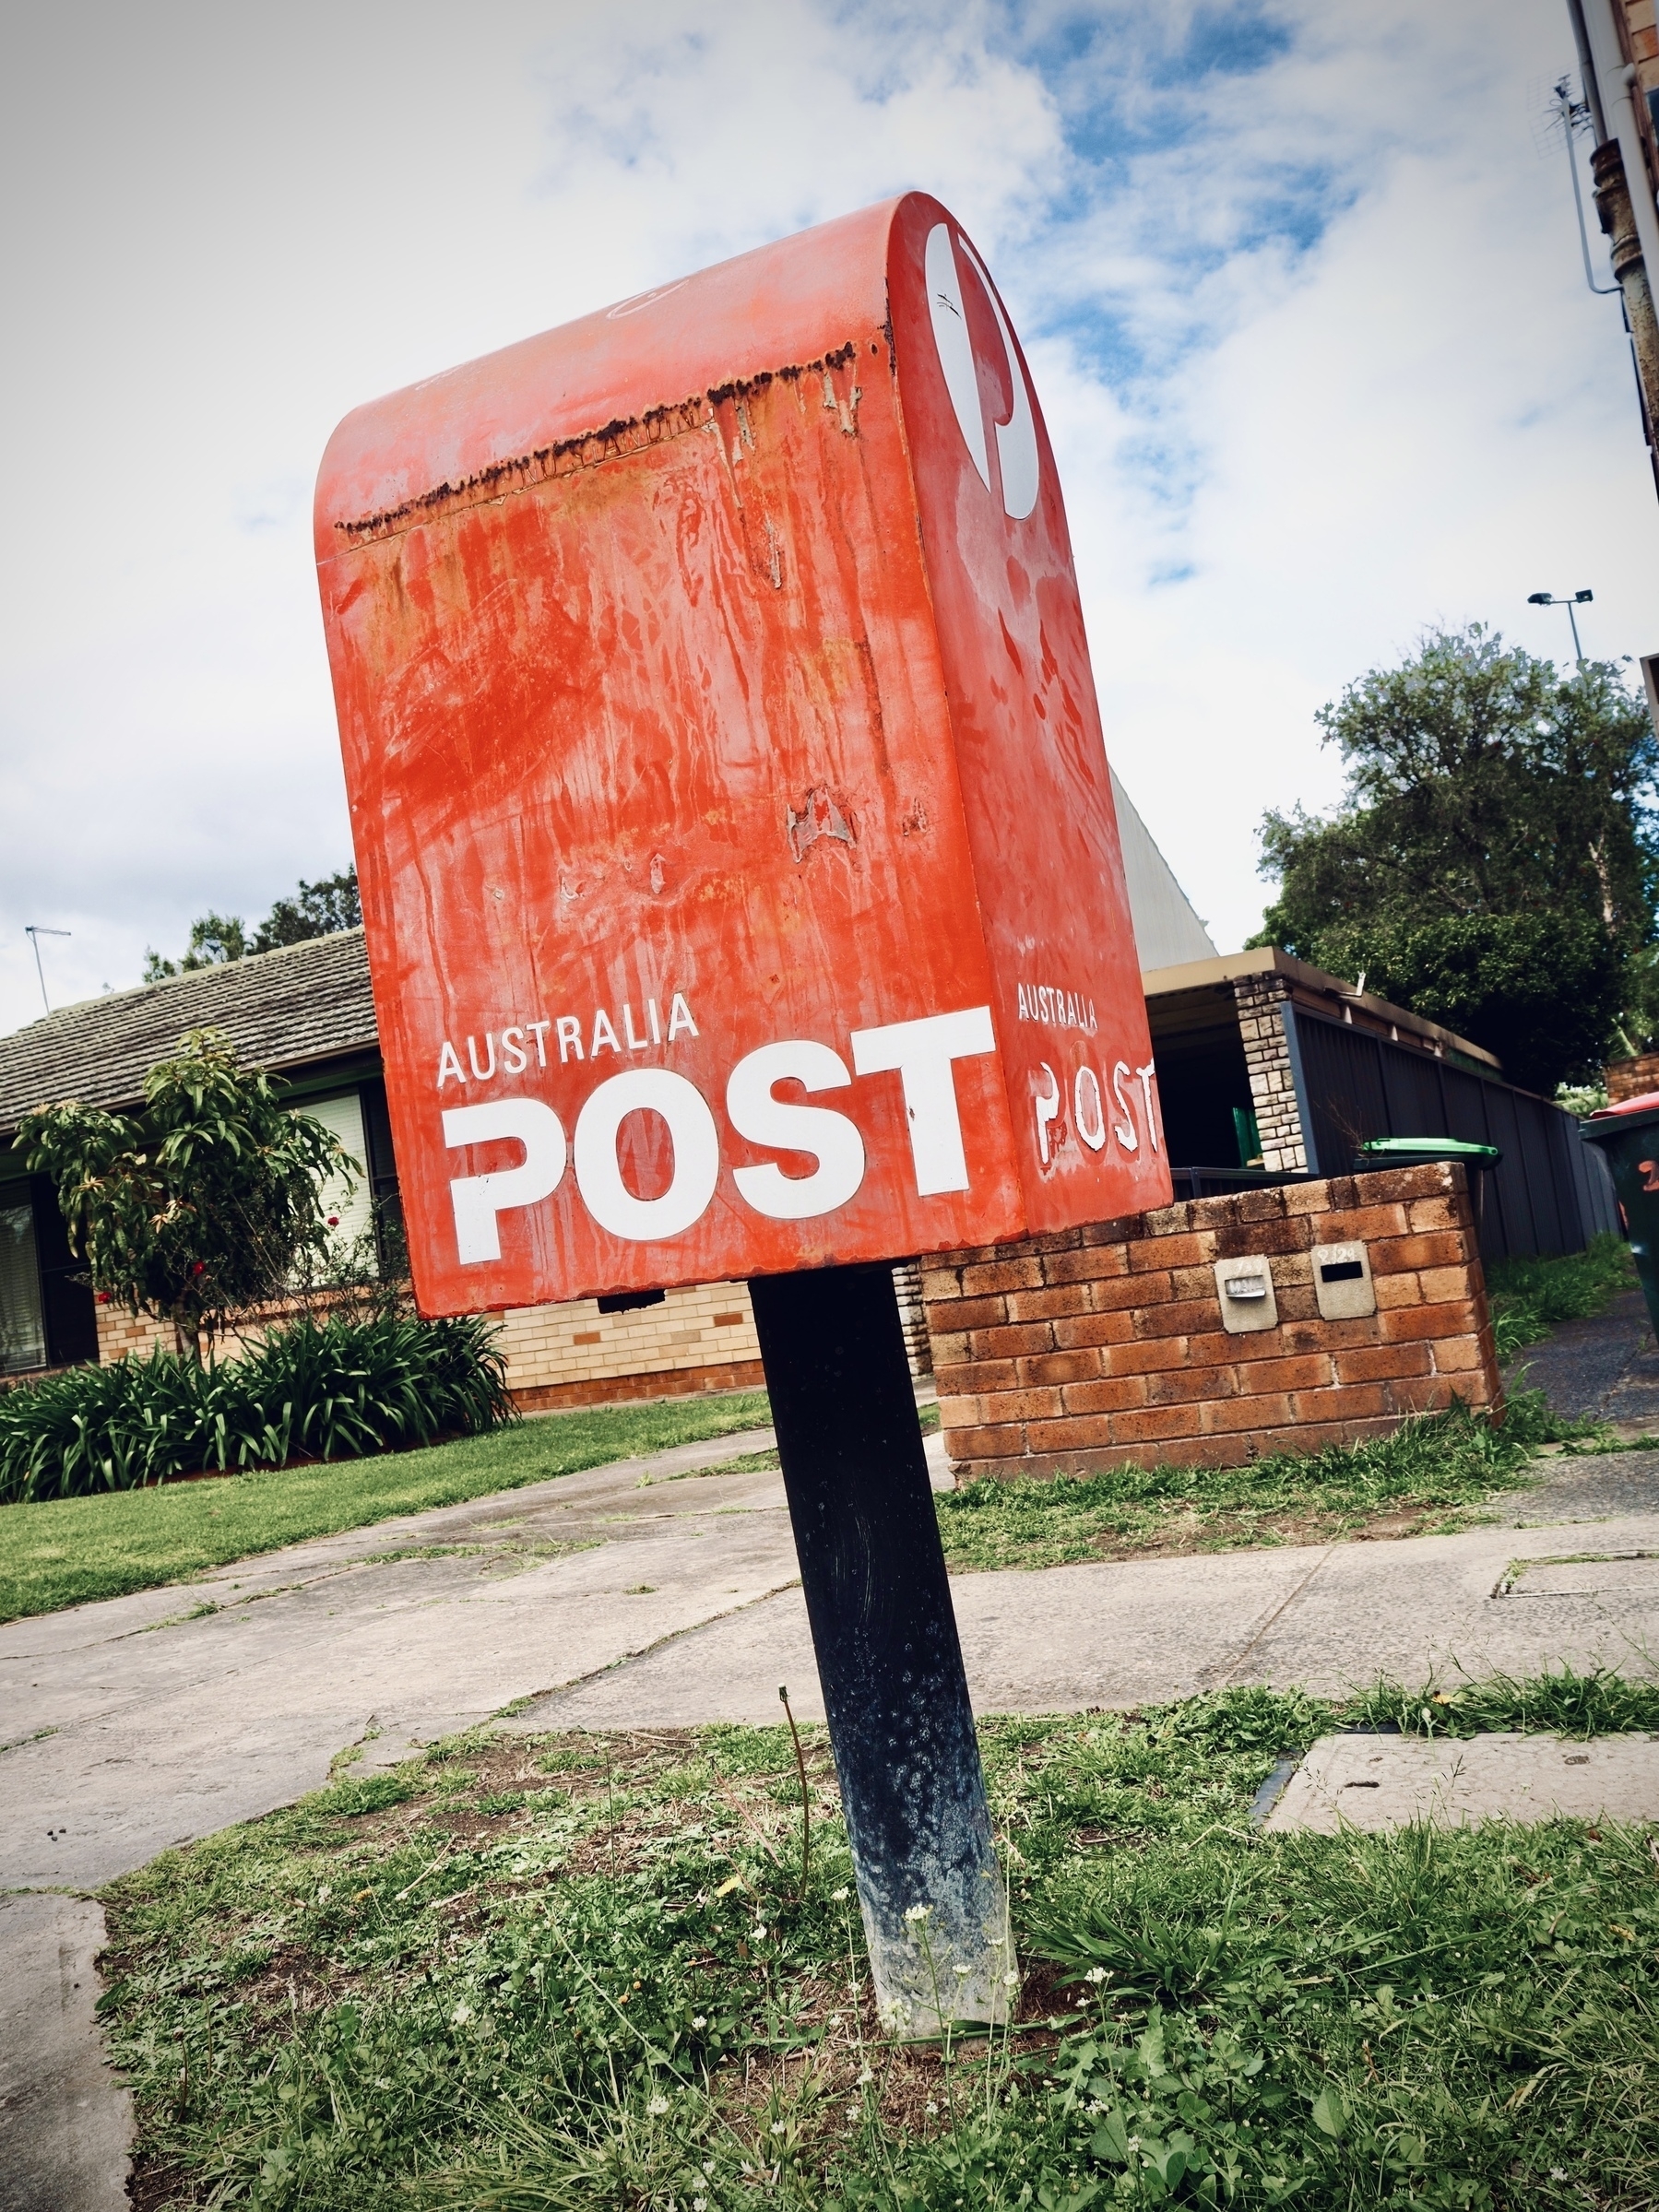 A rusty Australia Post box on a suburban footpath in front of a brick house